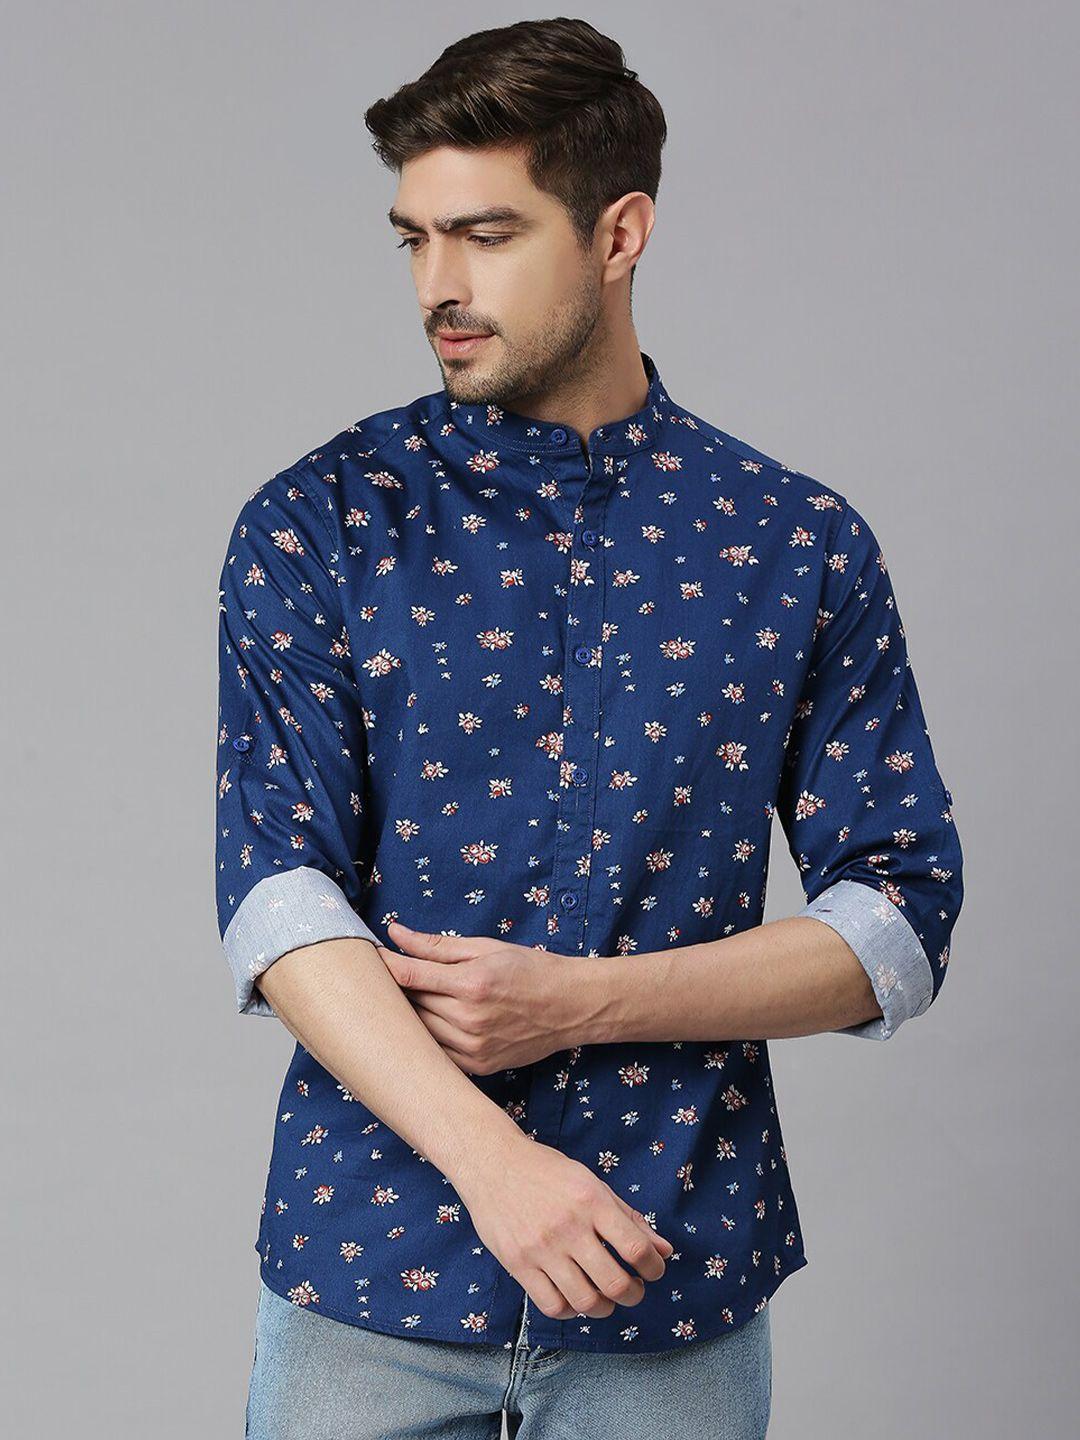 here&now navy blue classic slim fit printed mandarin collar pure cotton casual shirt